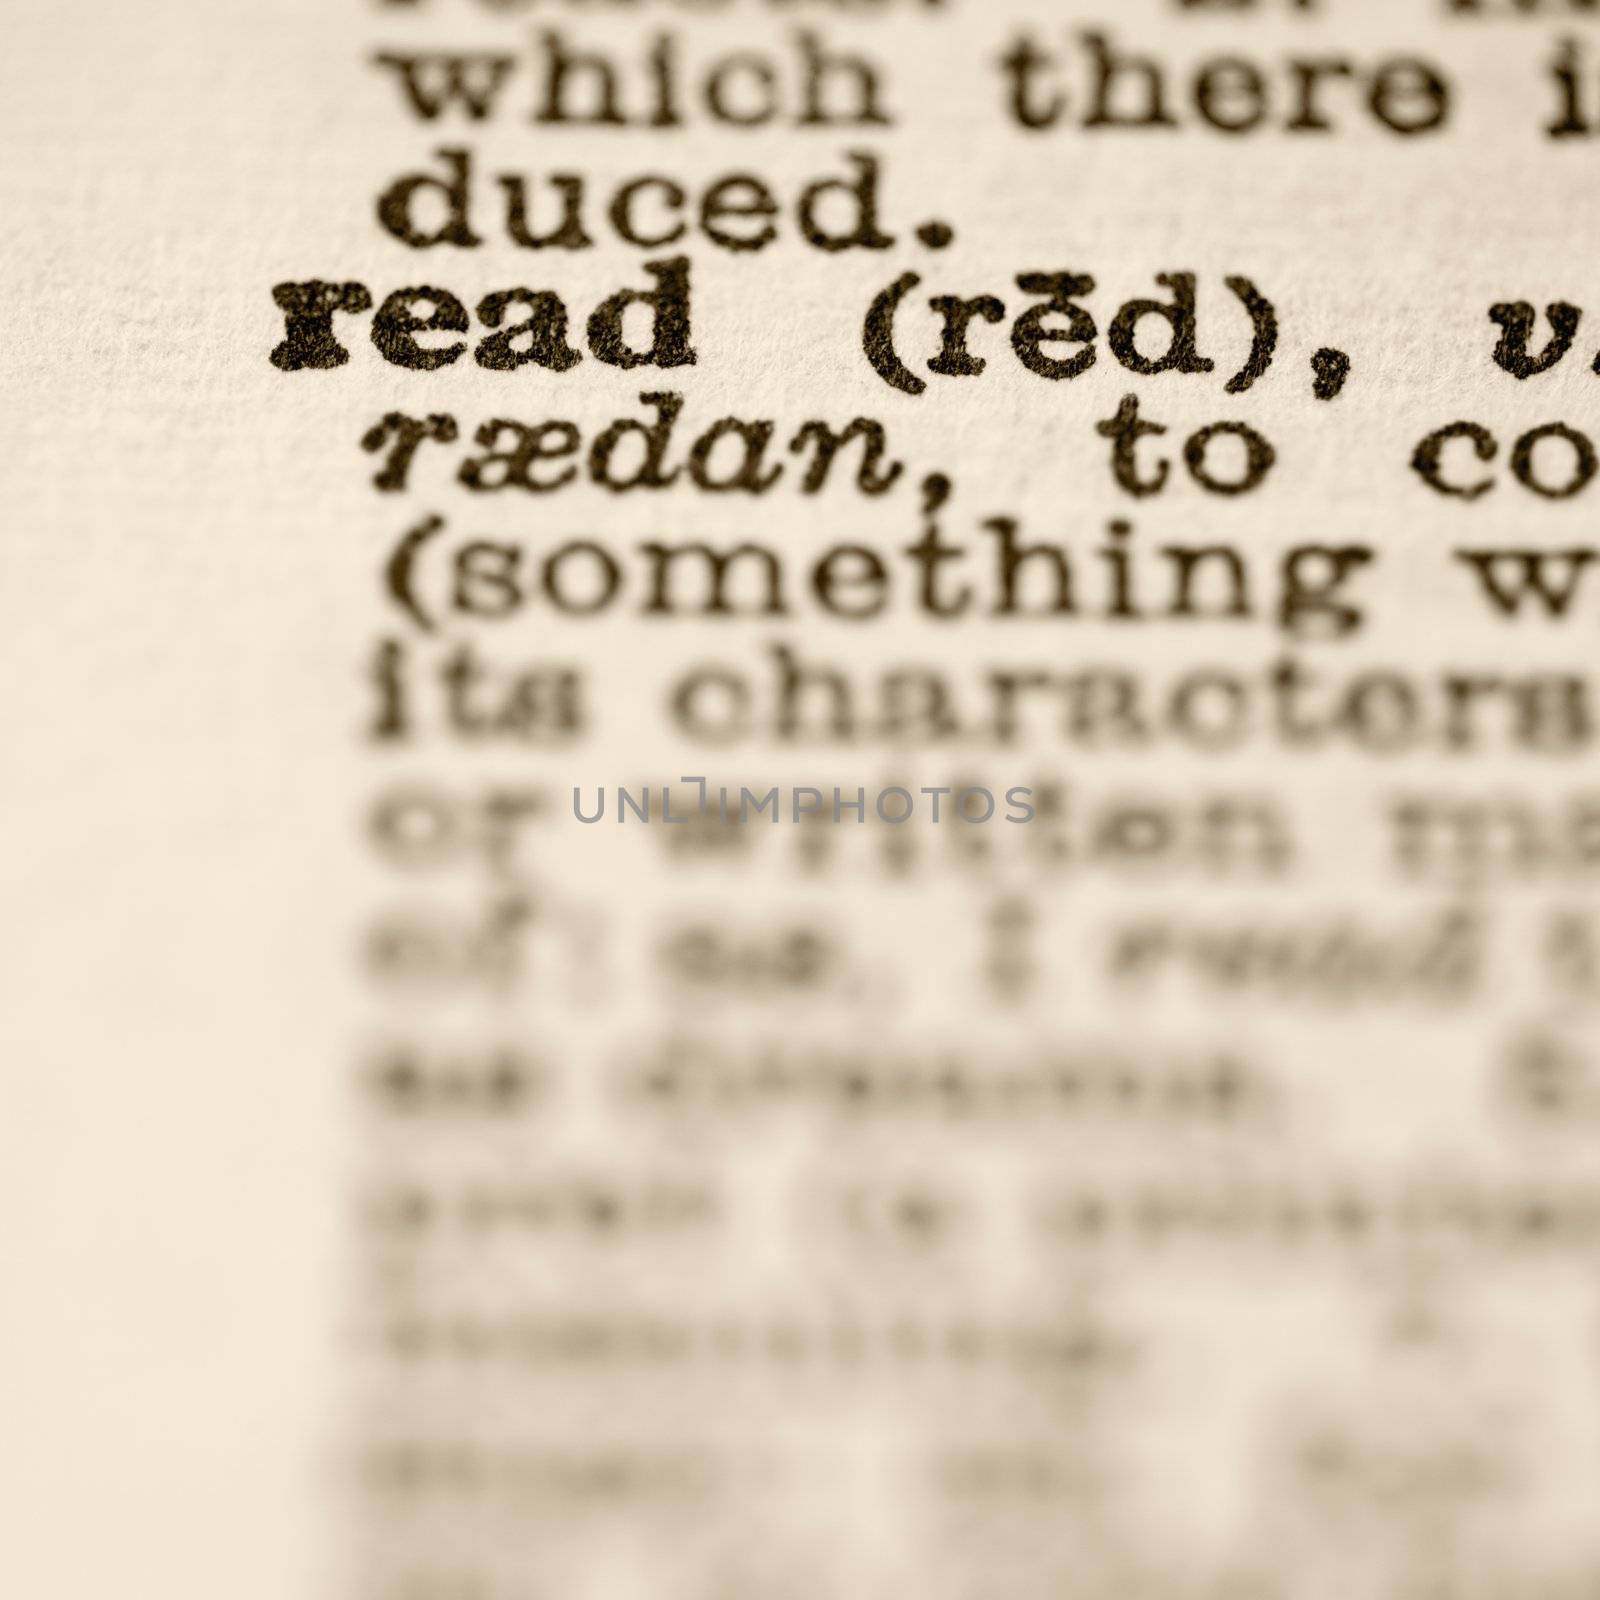 Definition of read. by iofoto